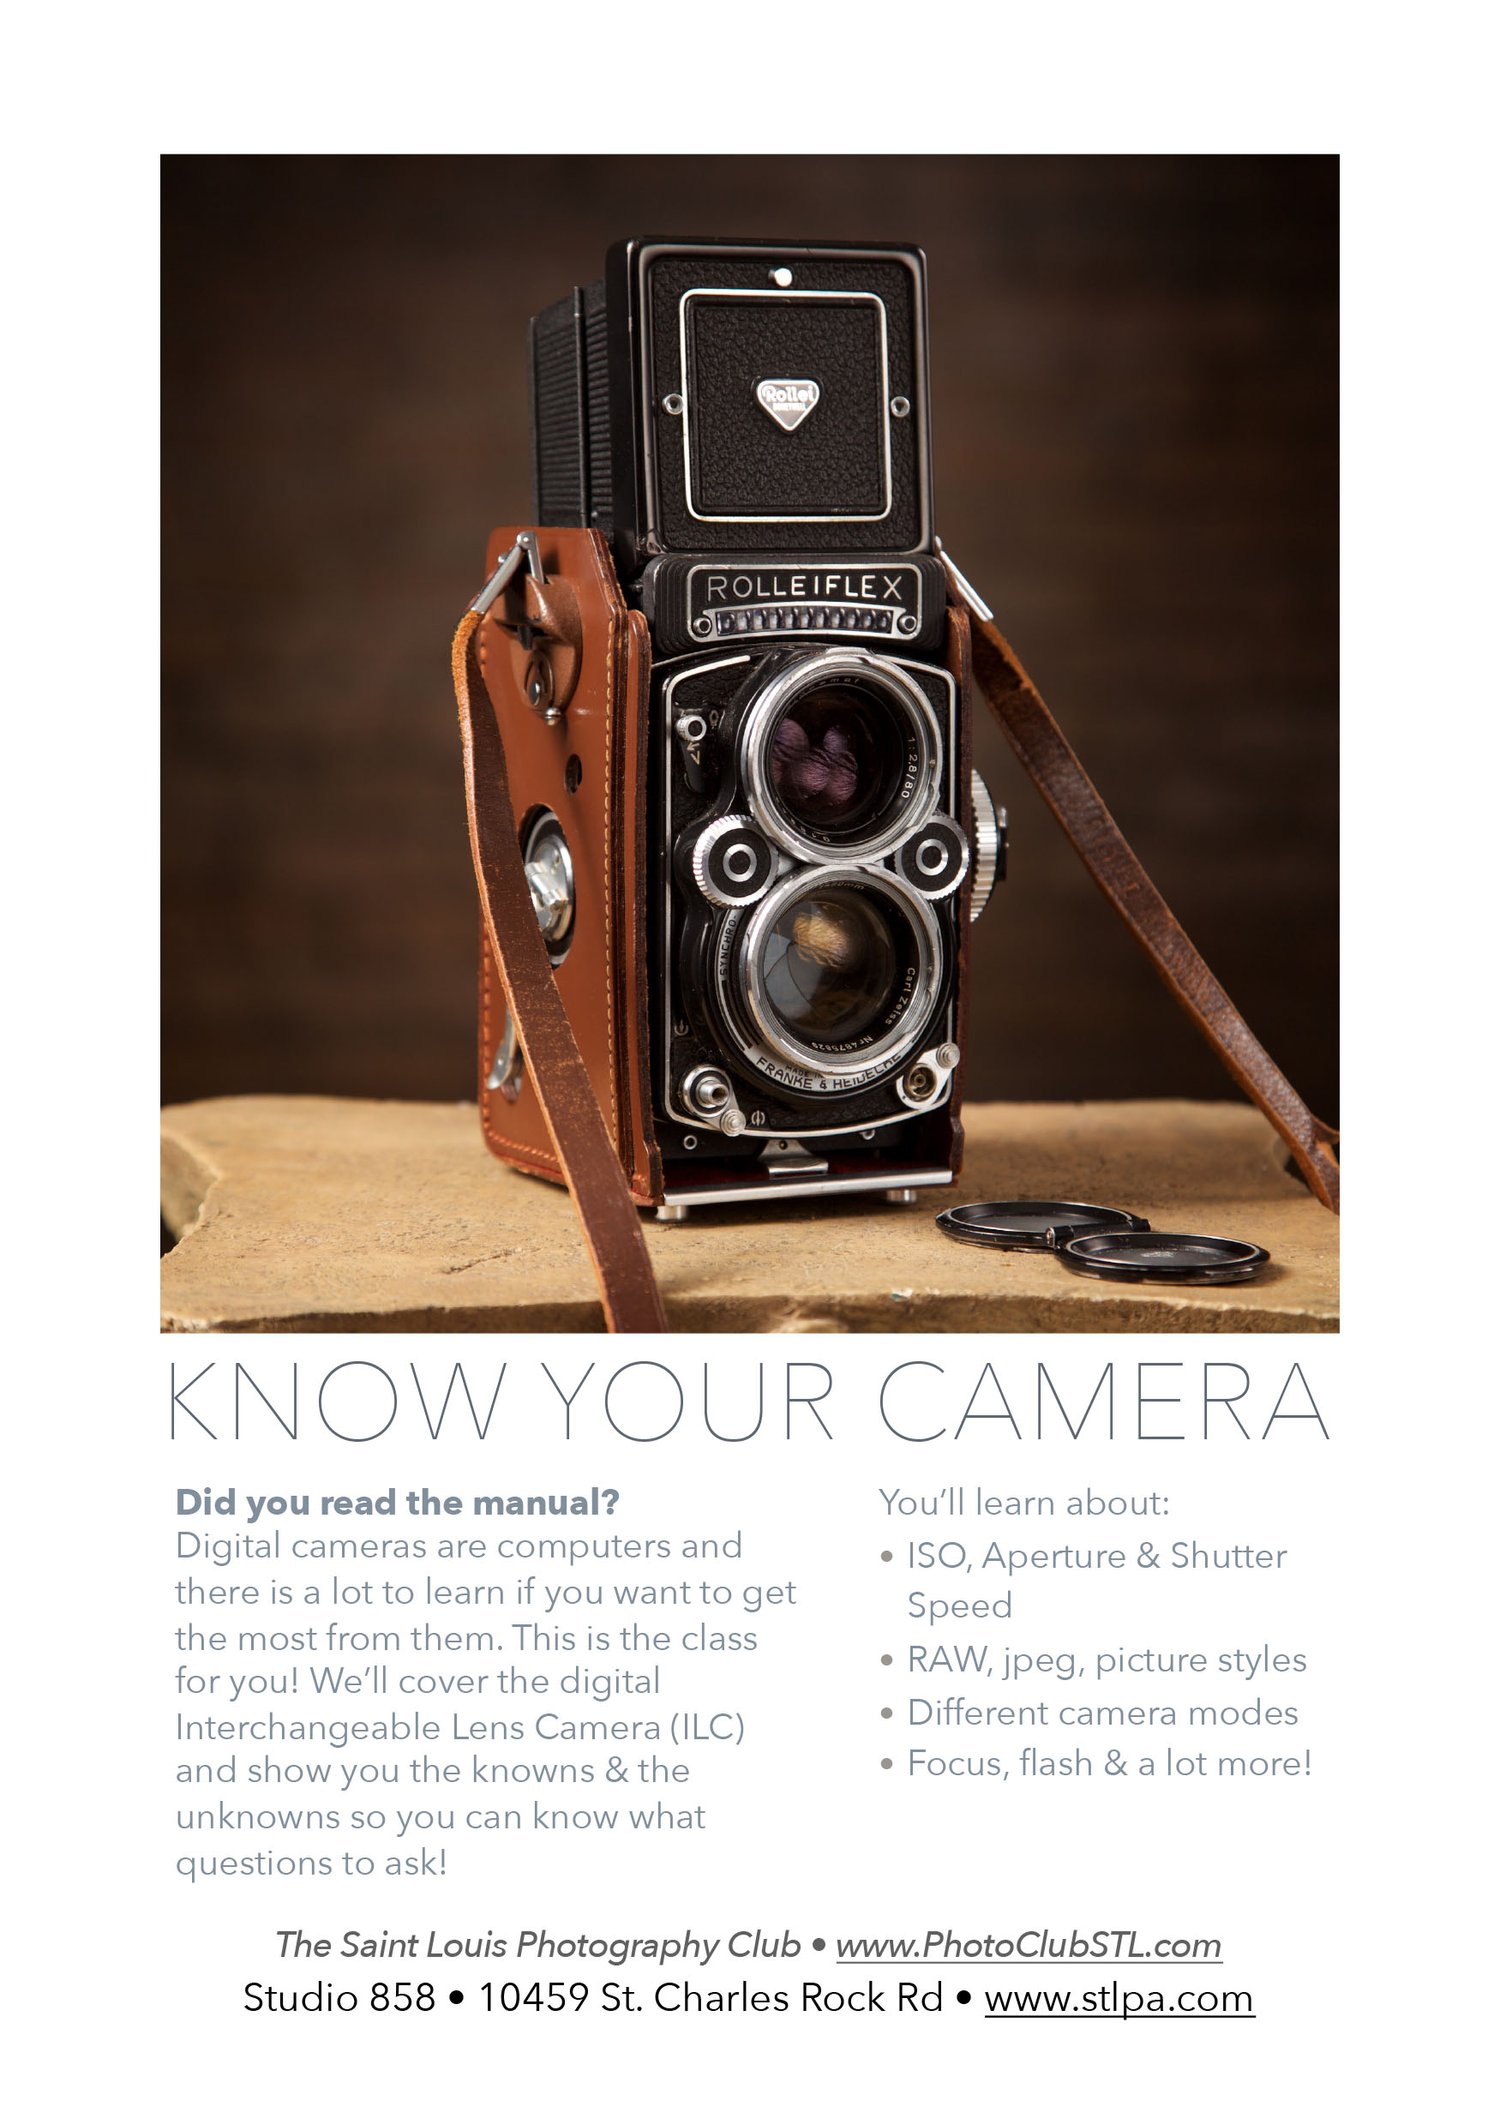 Digital Photography: Getting to Know Your Camera